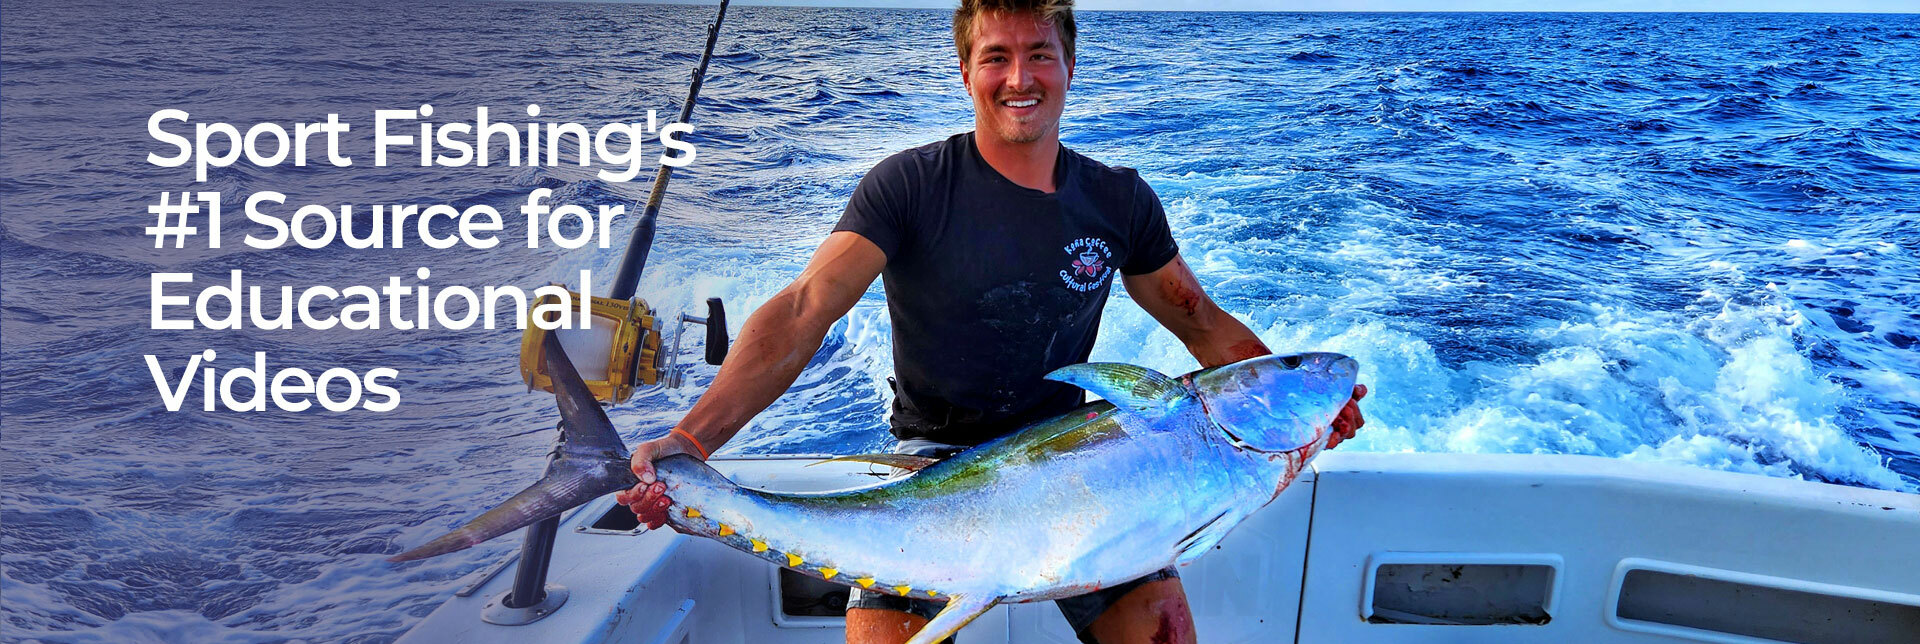 Tuna - Sport Fishing's #1 Source for Educational Videos, In the Spread Home Slider